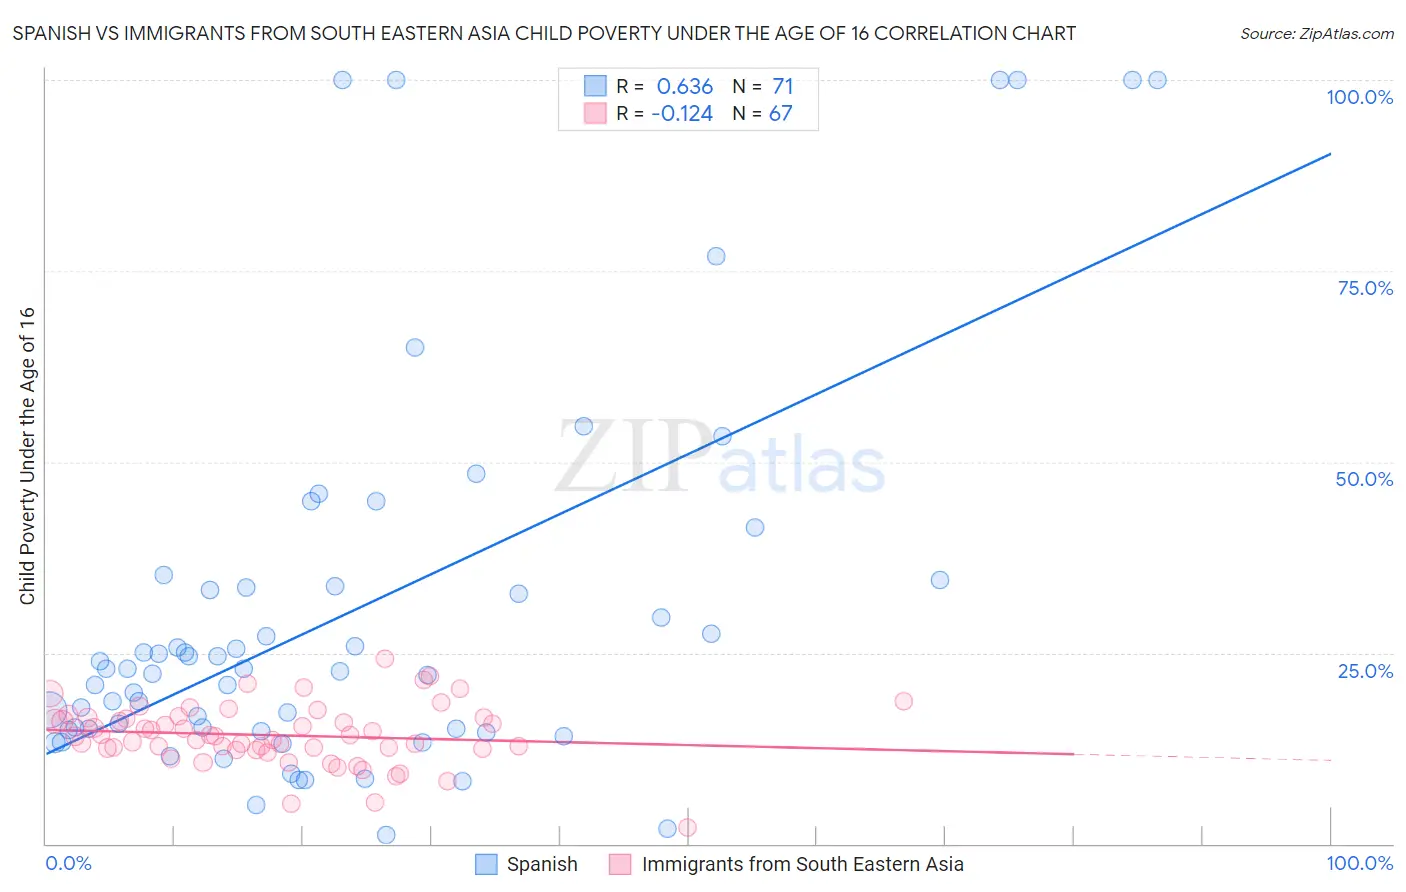 Spanish vs Immigrants from South Eastern Asia Child Poverty Under the Age of 16